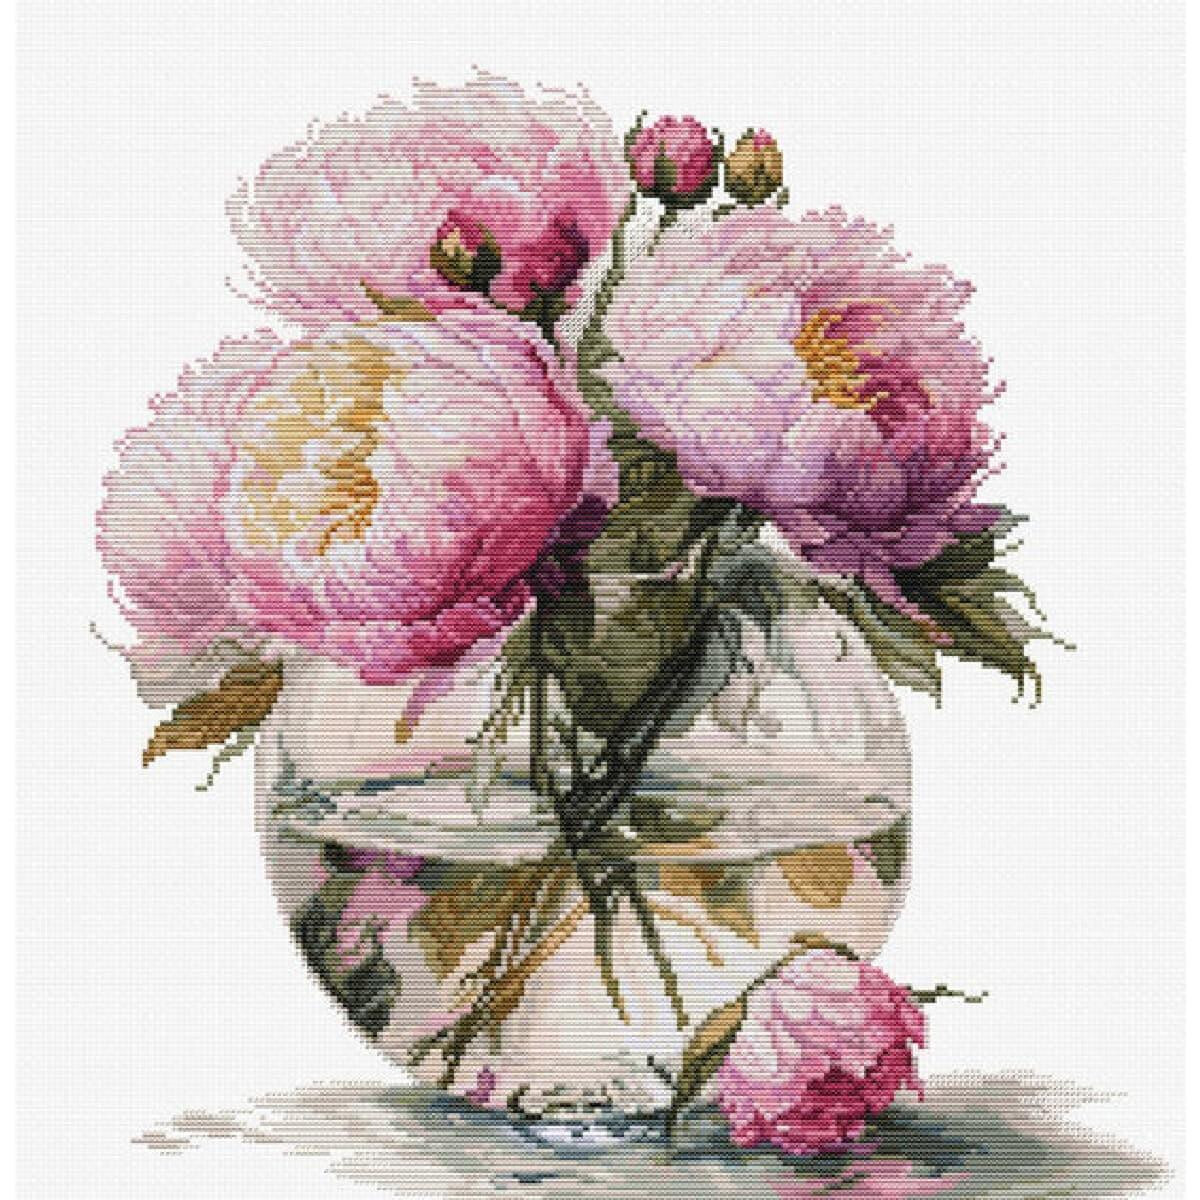 A round glass vase filled with water contains a bouquet...